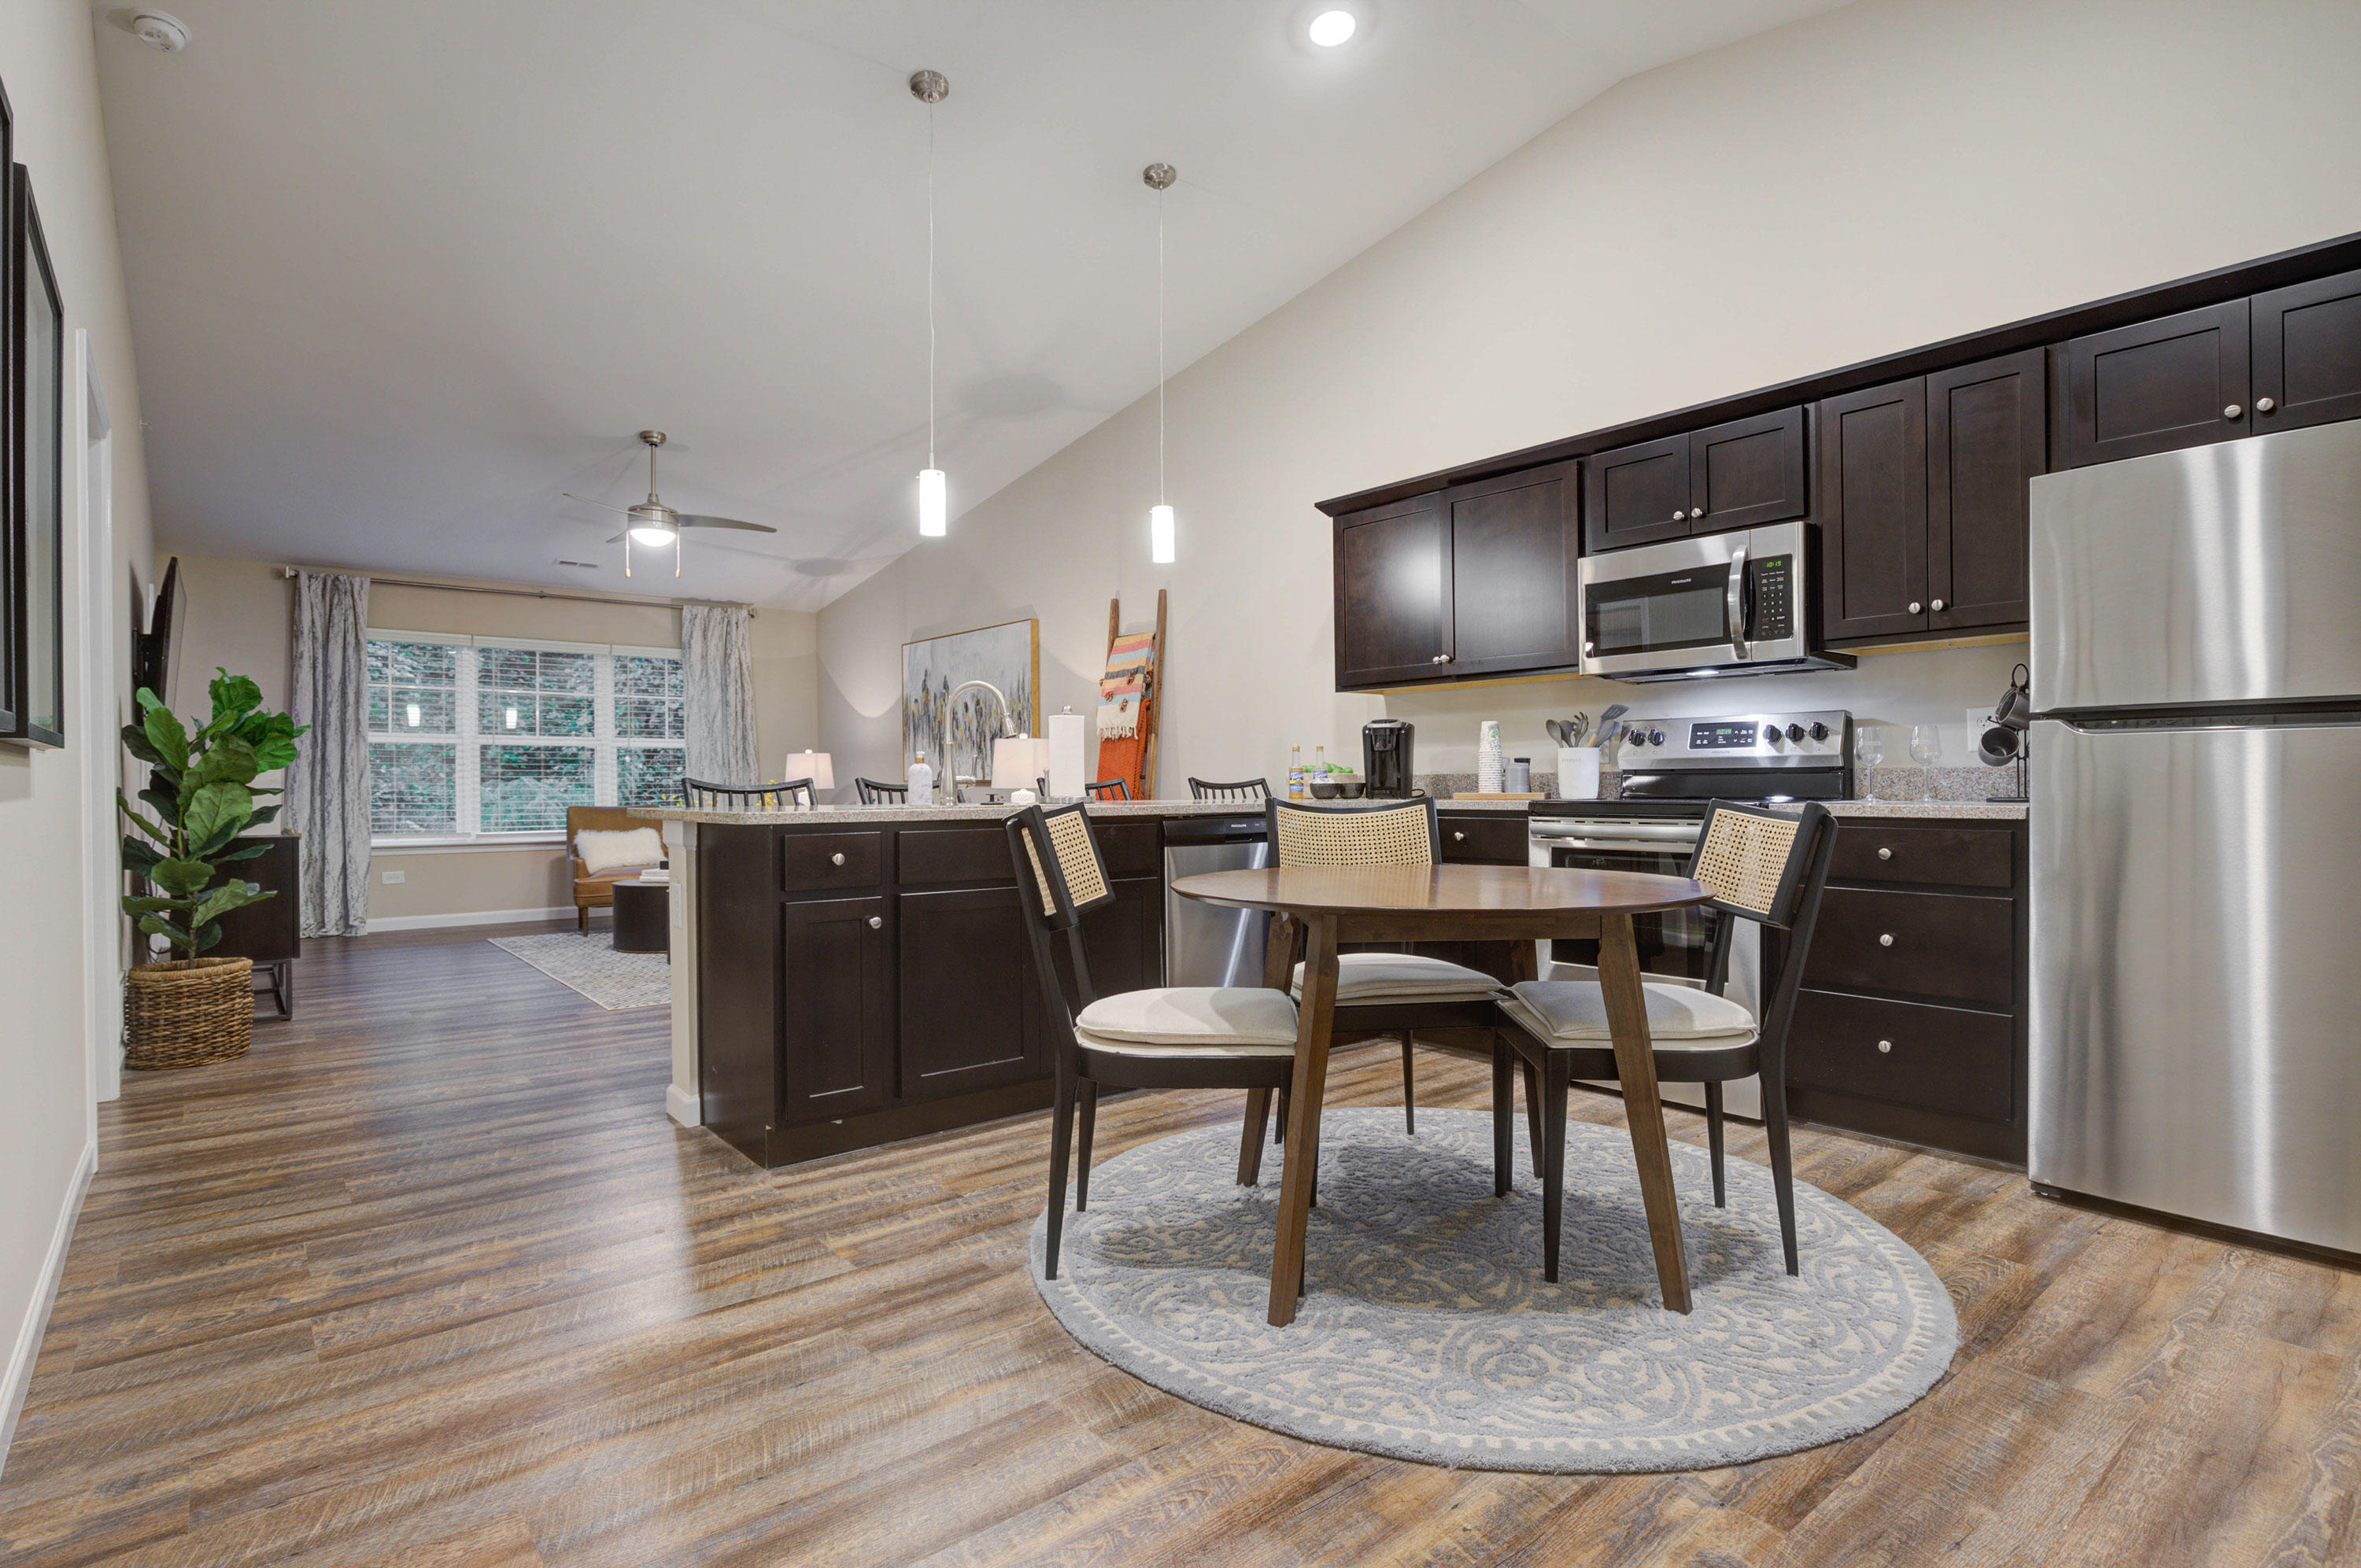 Spacious Kitchens with Breakfast Bar and Room for a Table